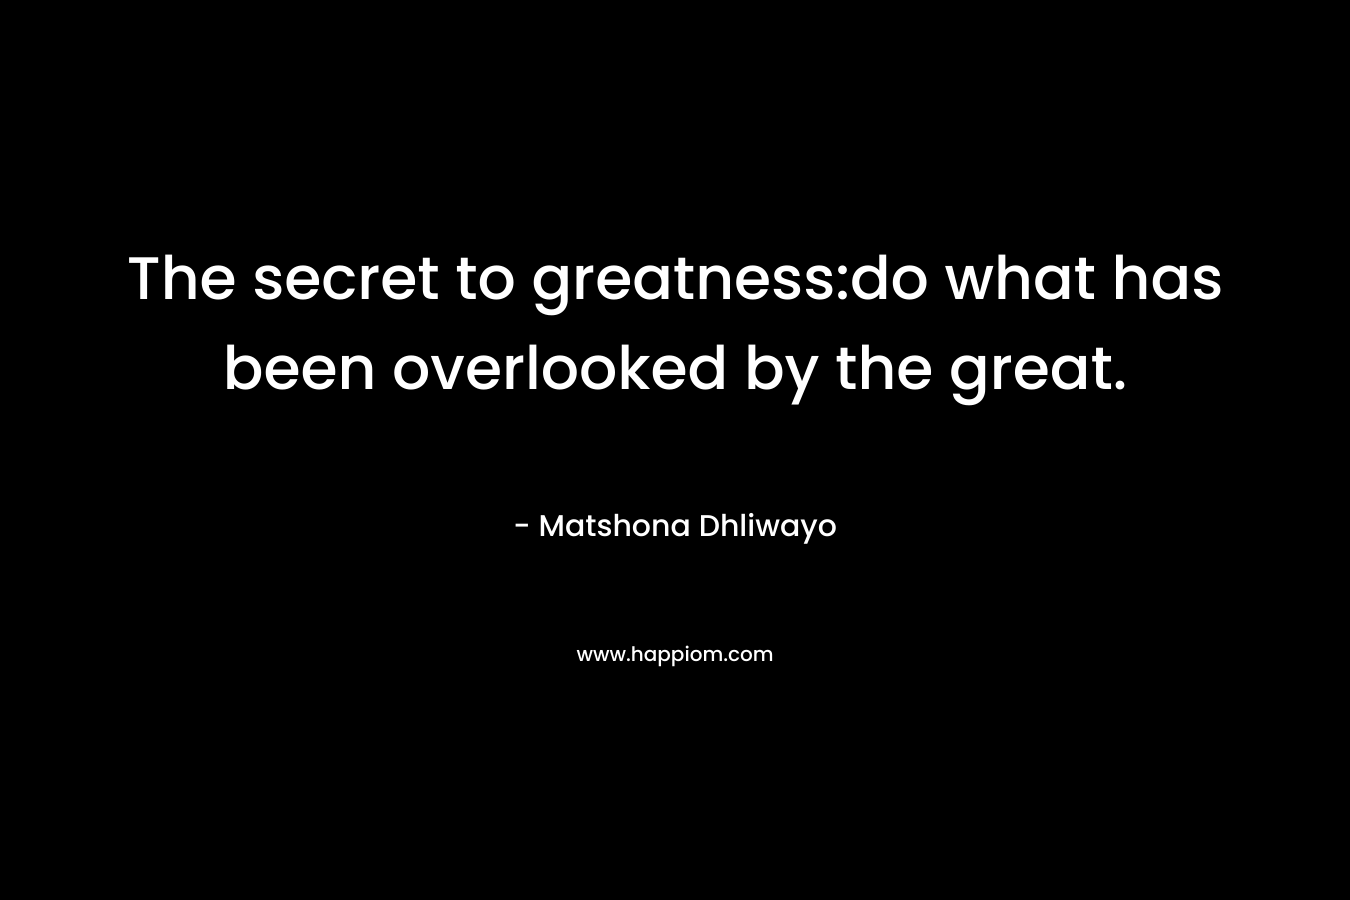 The secret to greatness:do what has been overlooked by the great.